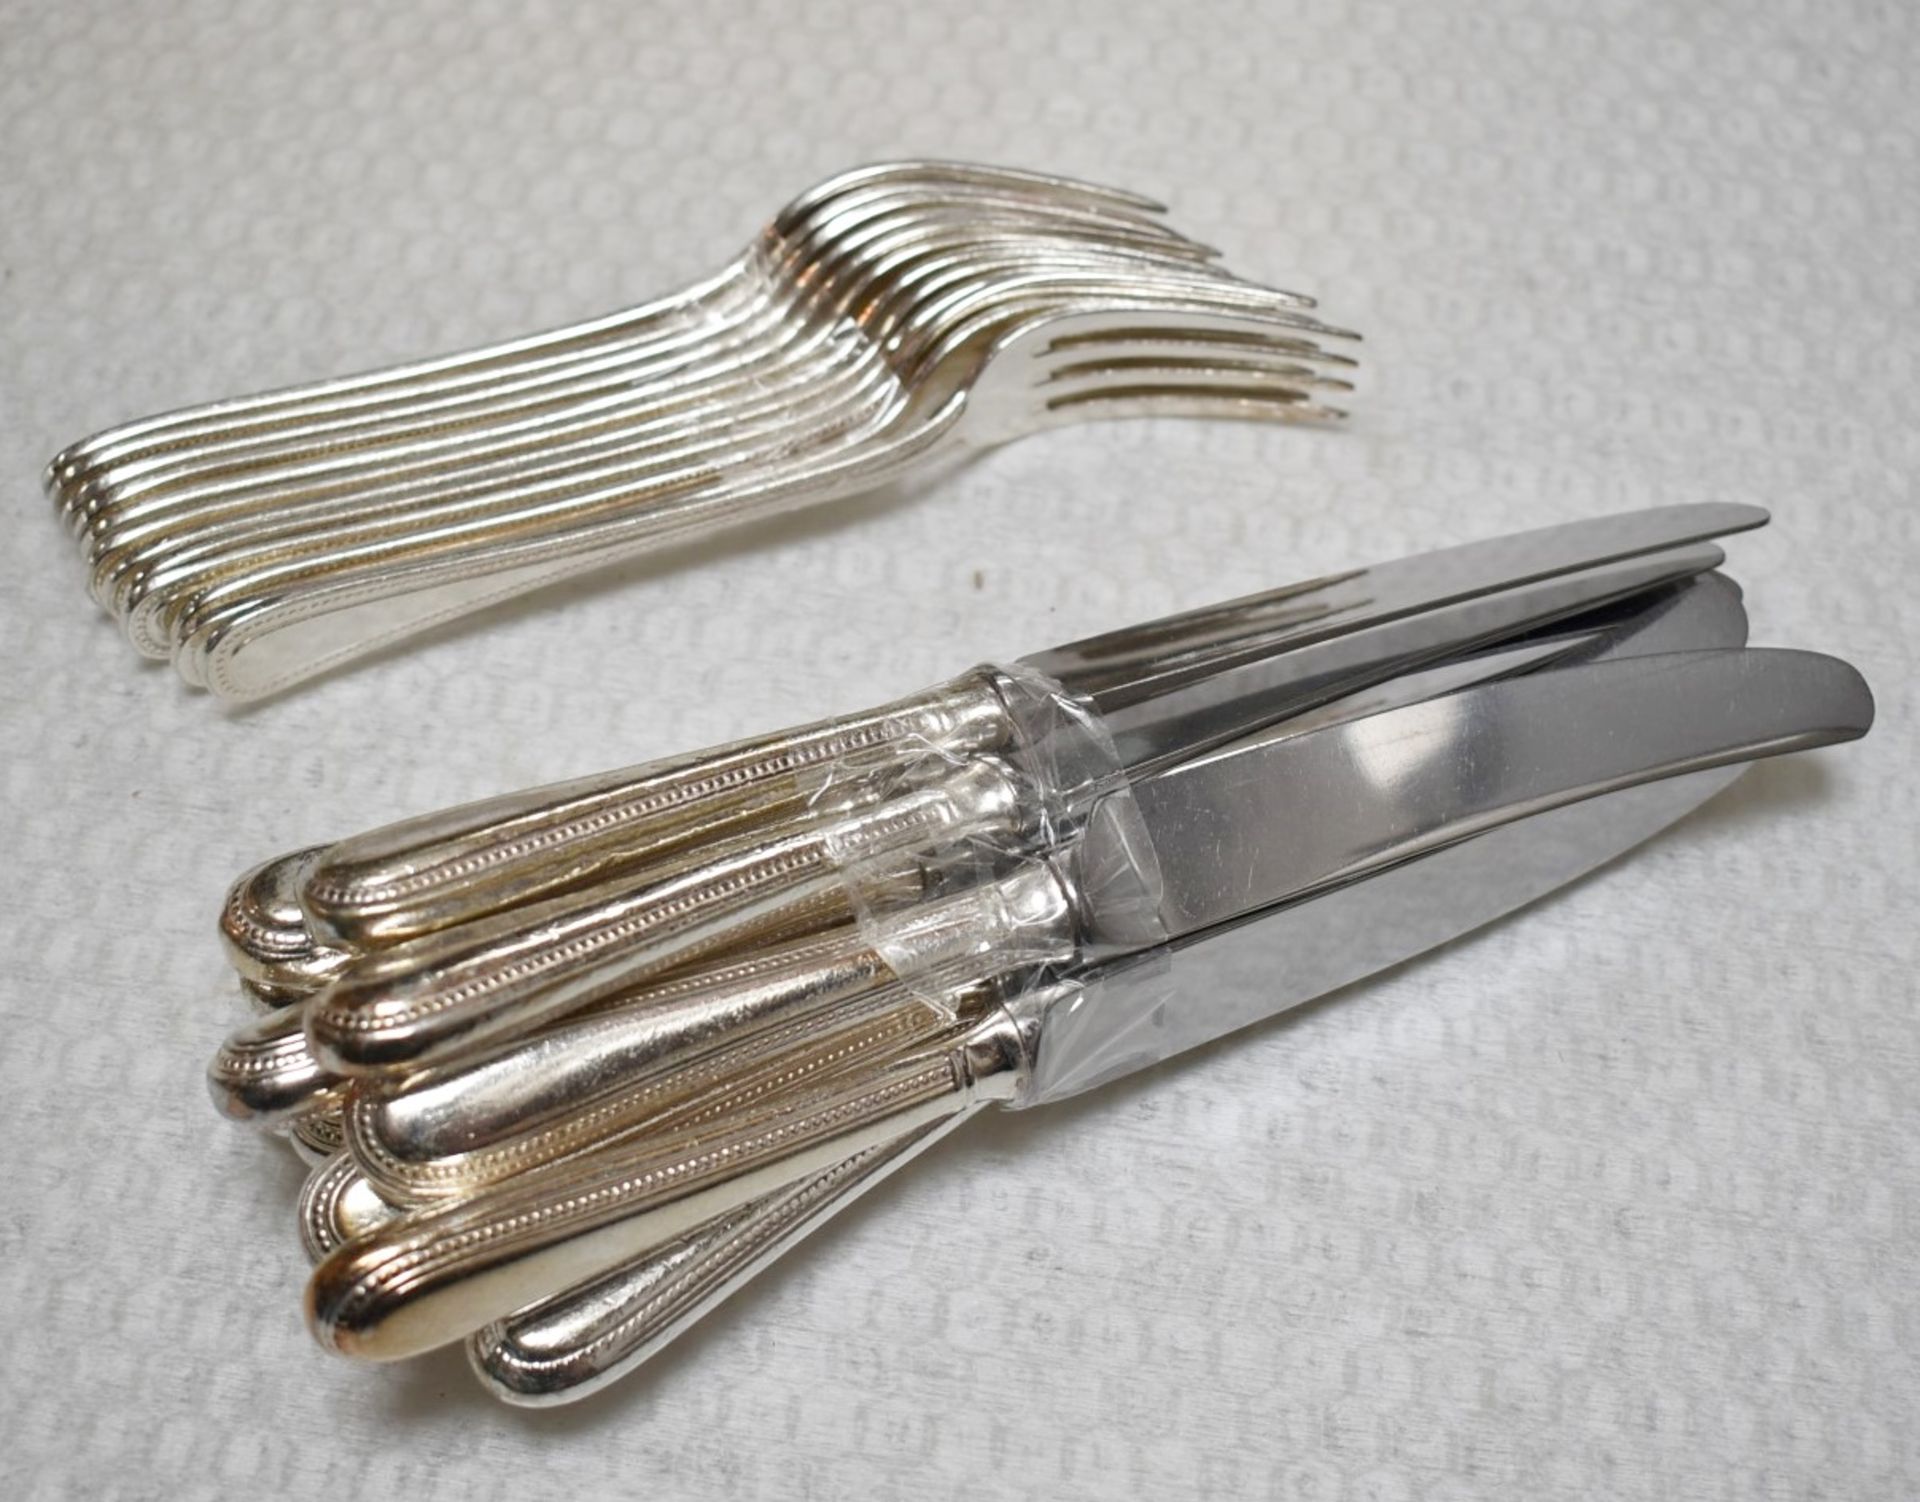 40 x Pieces of Silver Plated Stainless Steel Decorative Cutlery - Includes Knives, Forks, Spoons and - Image 9 of 11